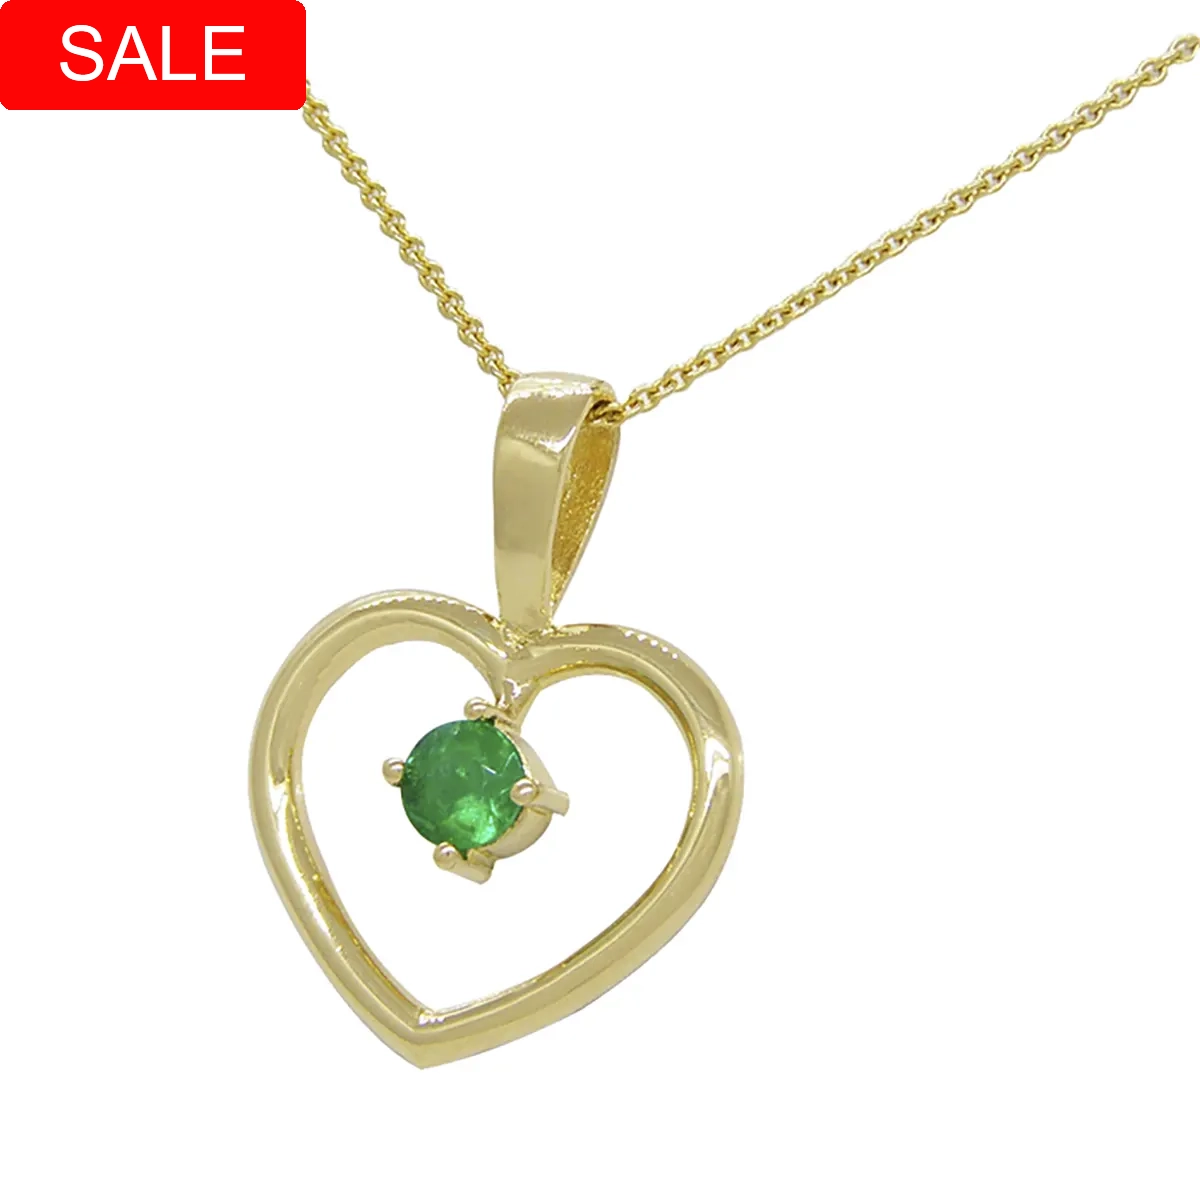 18K Yellow Gold Heart Shape Emerald Pendant with 0.22 Ct. Round Cut Emerald